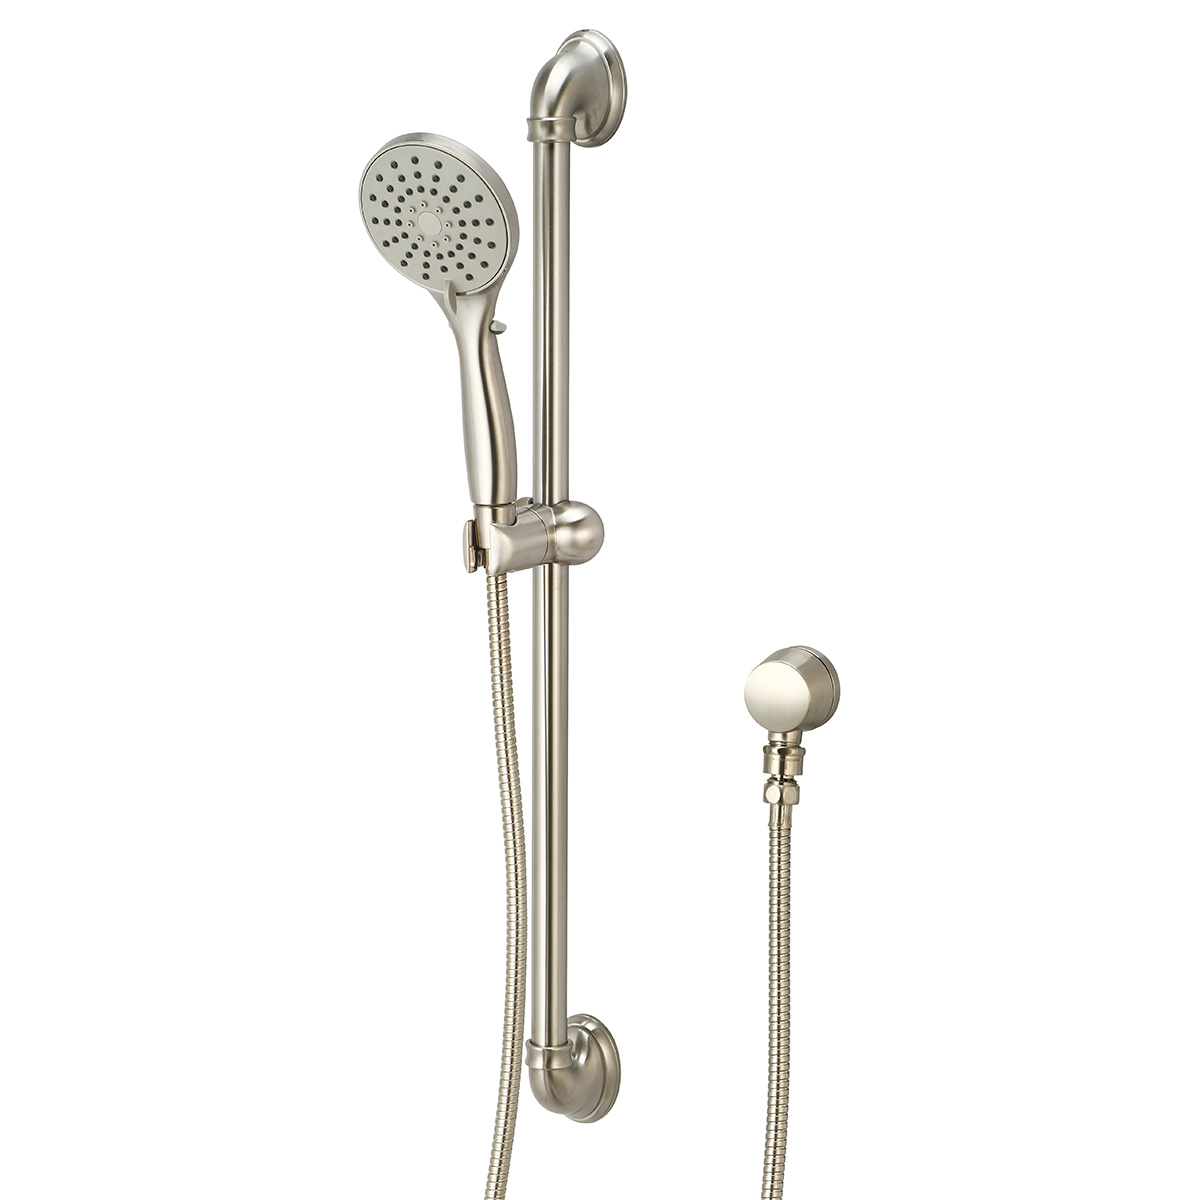 Picture of Accent P-4430-BN Accent Handheld Shower Set - Brushed Nickel